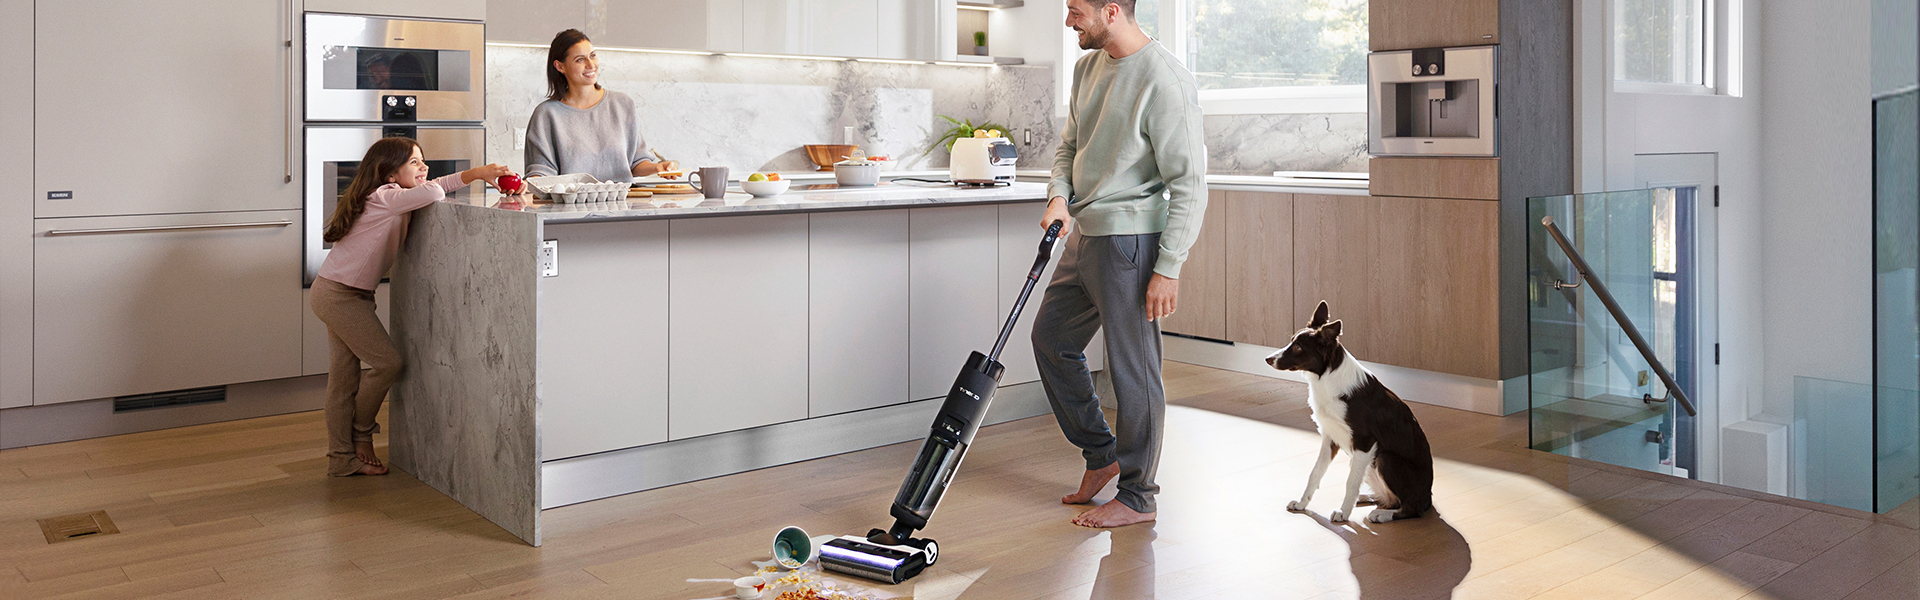 Innovative Home Appliances for Modern Living: Tineco Floor Washer, Vacuum  Cleaner, Carpet Cleaner, Toaster